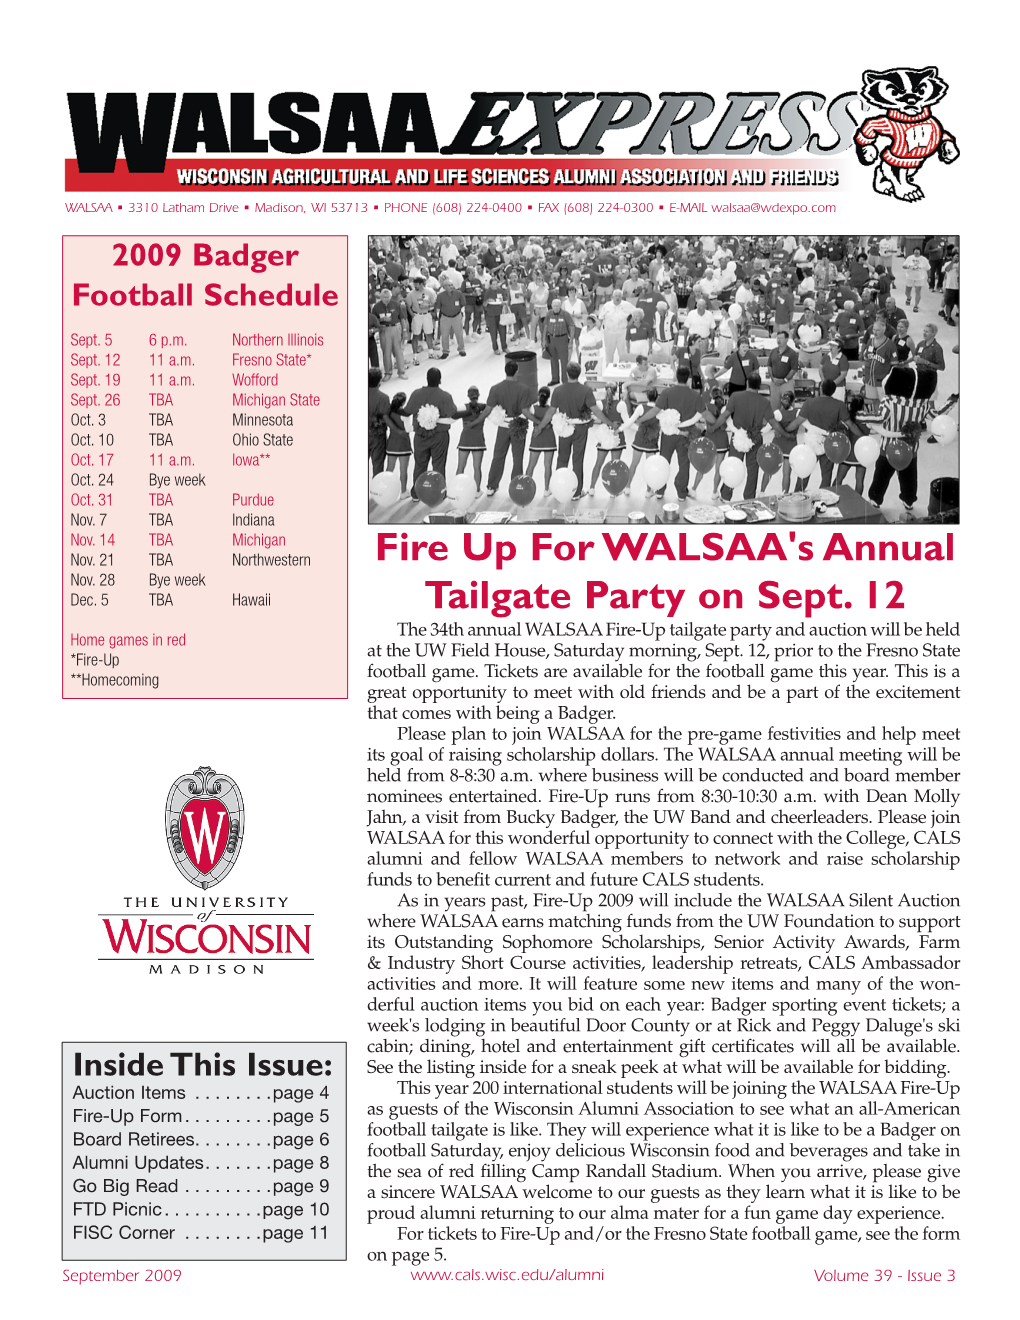 Fire up for WALSAA's Annual Tailgate Party on Sept. 12